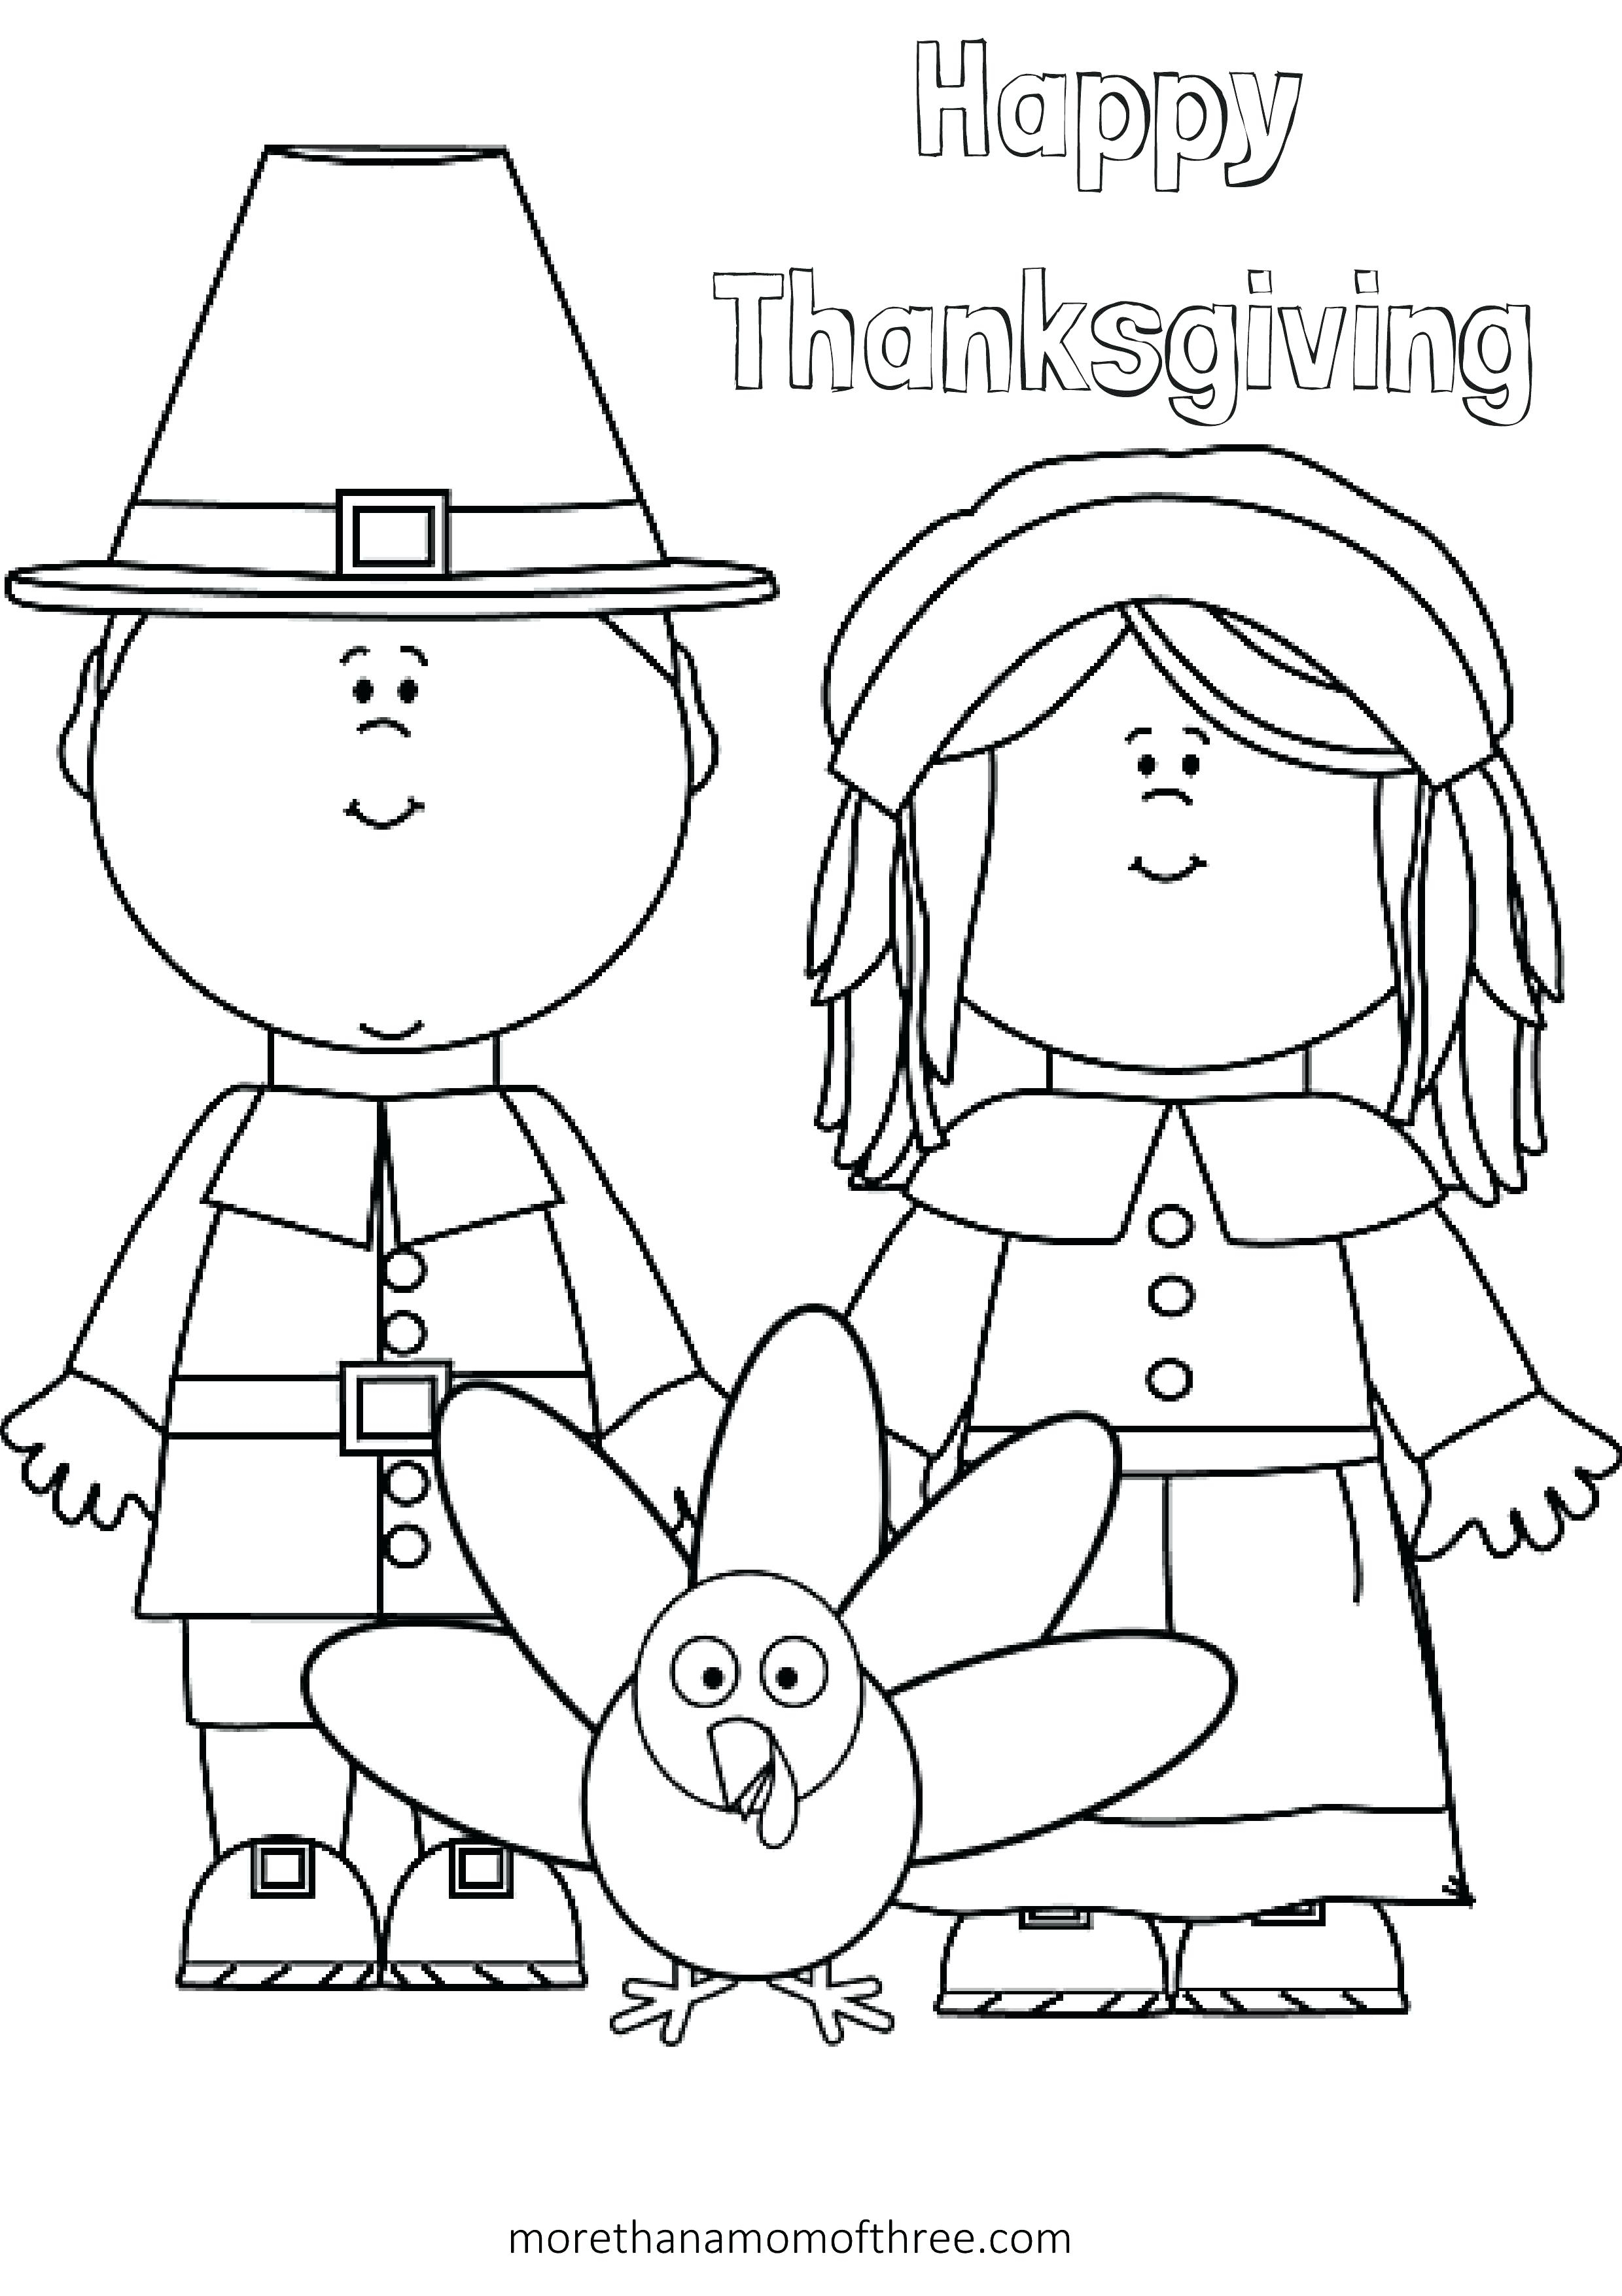 Pilgrim Coloring Pages Pilgrim Hats Coloring Pages Tophatsheetco